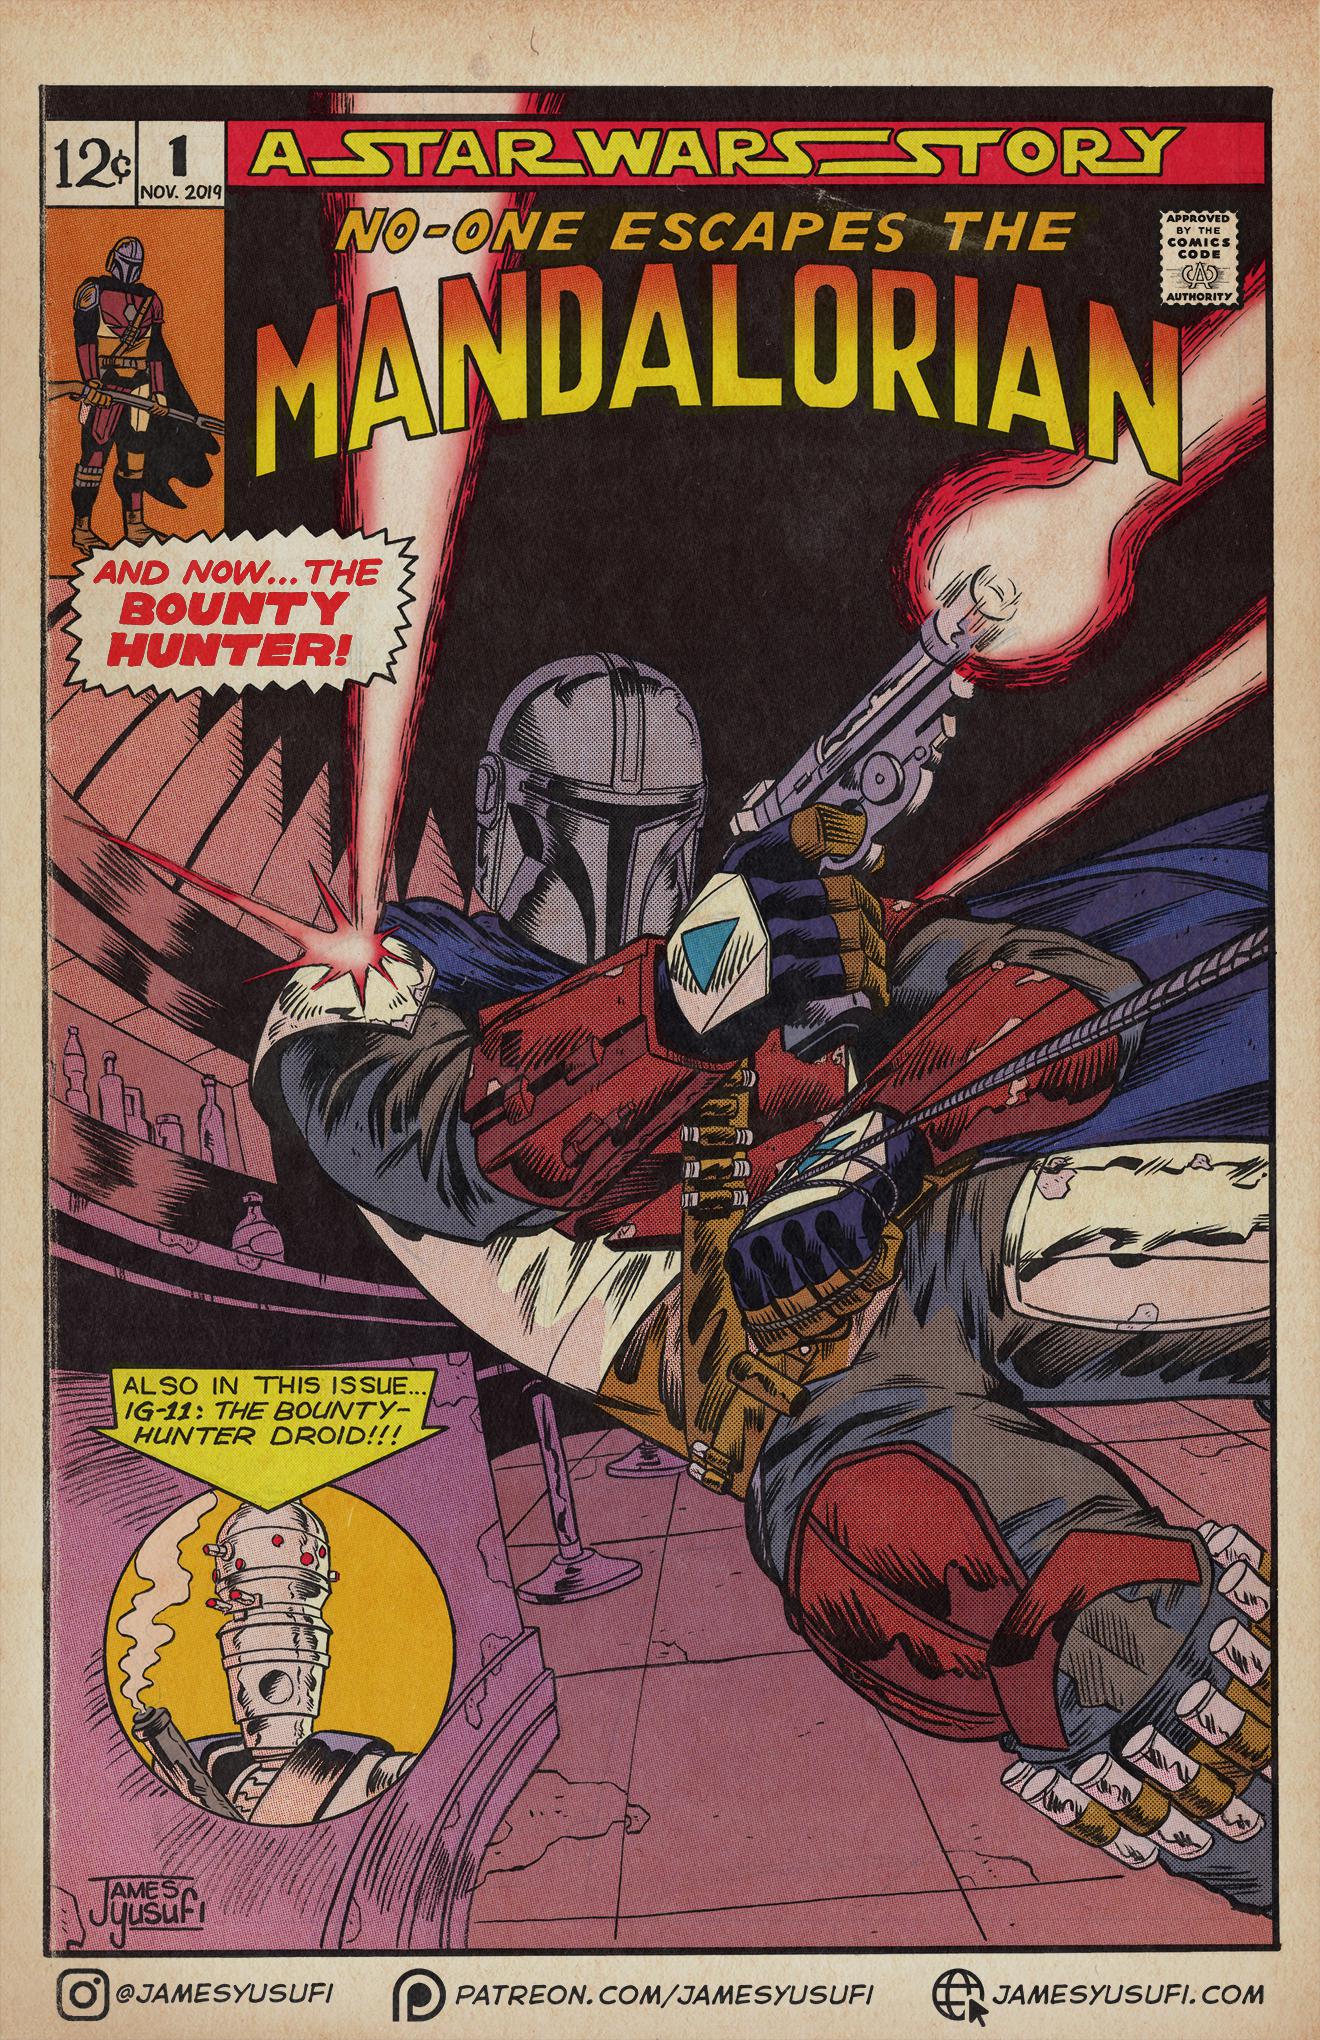 The Mandalorian as a pulpy comic book cover!